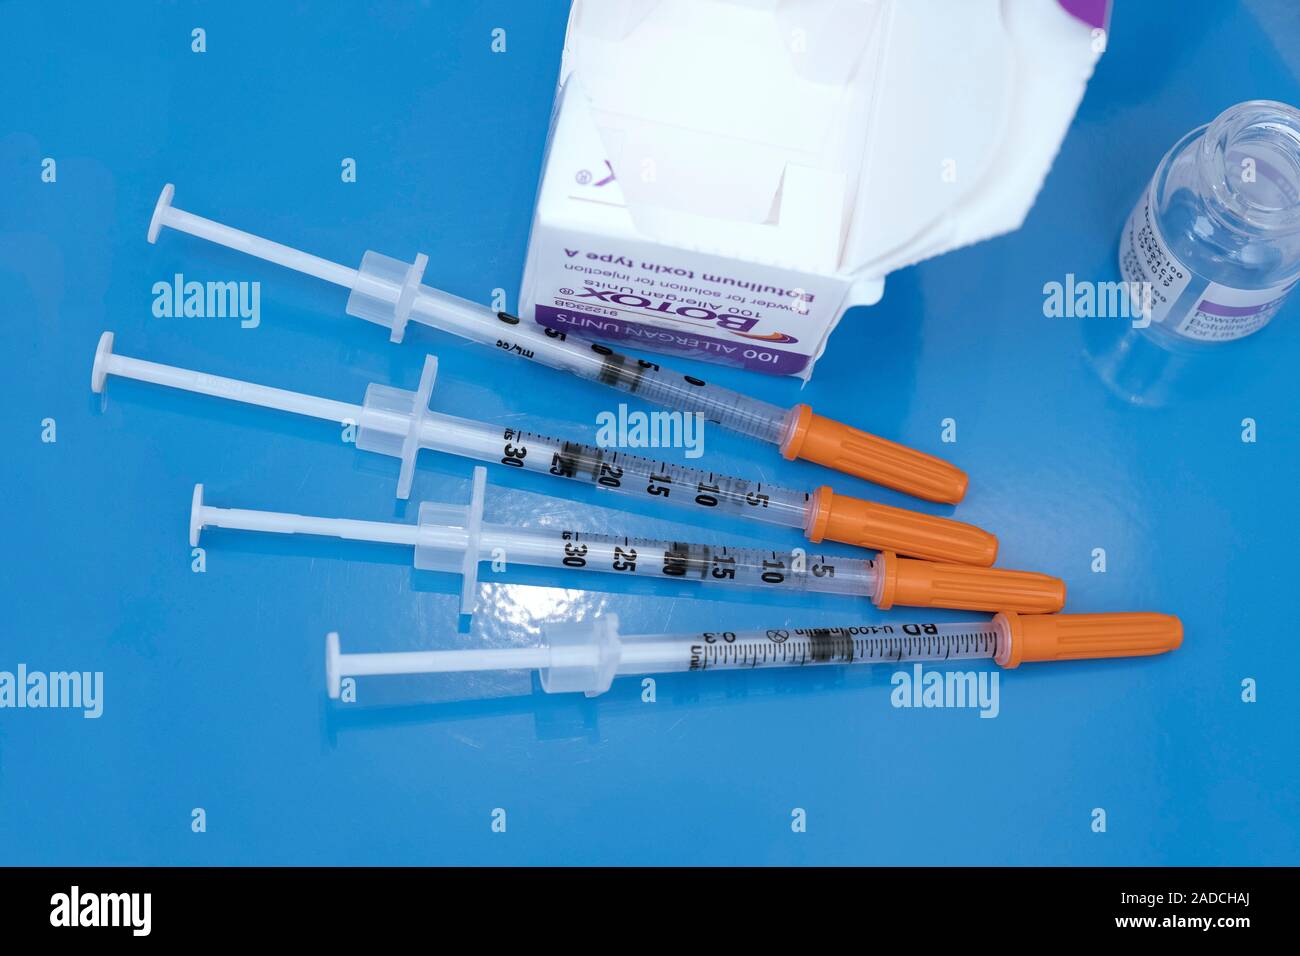 Botox cosmetic toxin. Syringes and a box containing a powder used to  prepare injections of the botox neurotoxin. This is used for preventing  wrinkles Stock Photo - Alamy